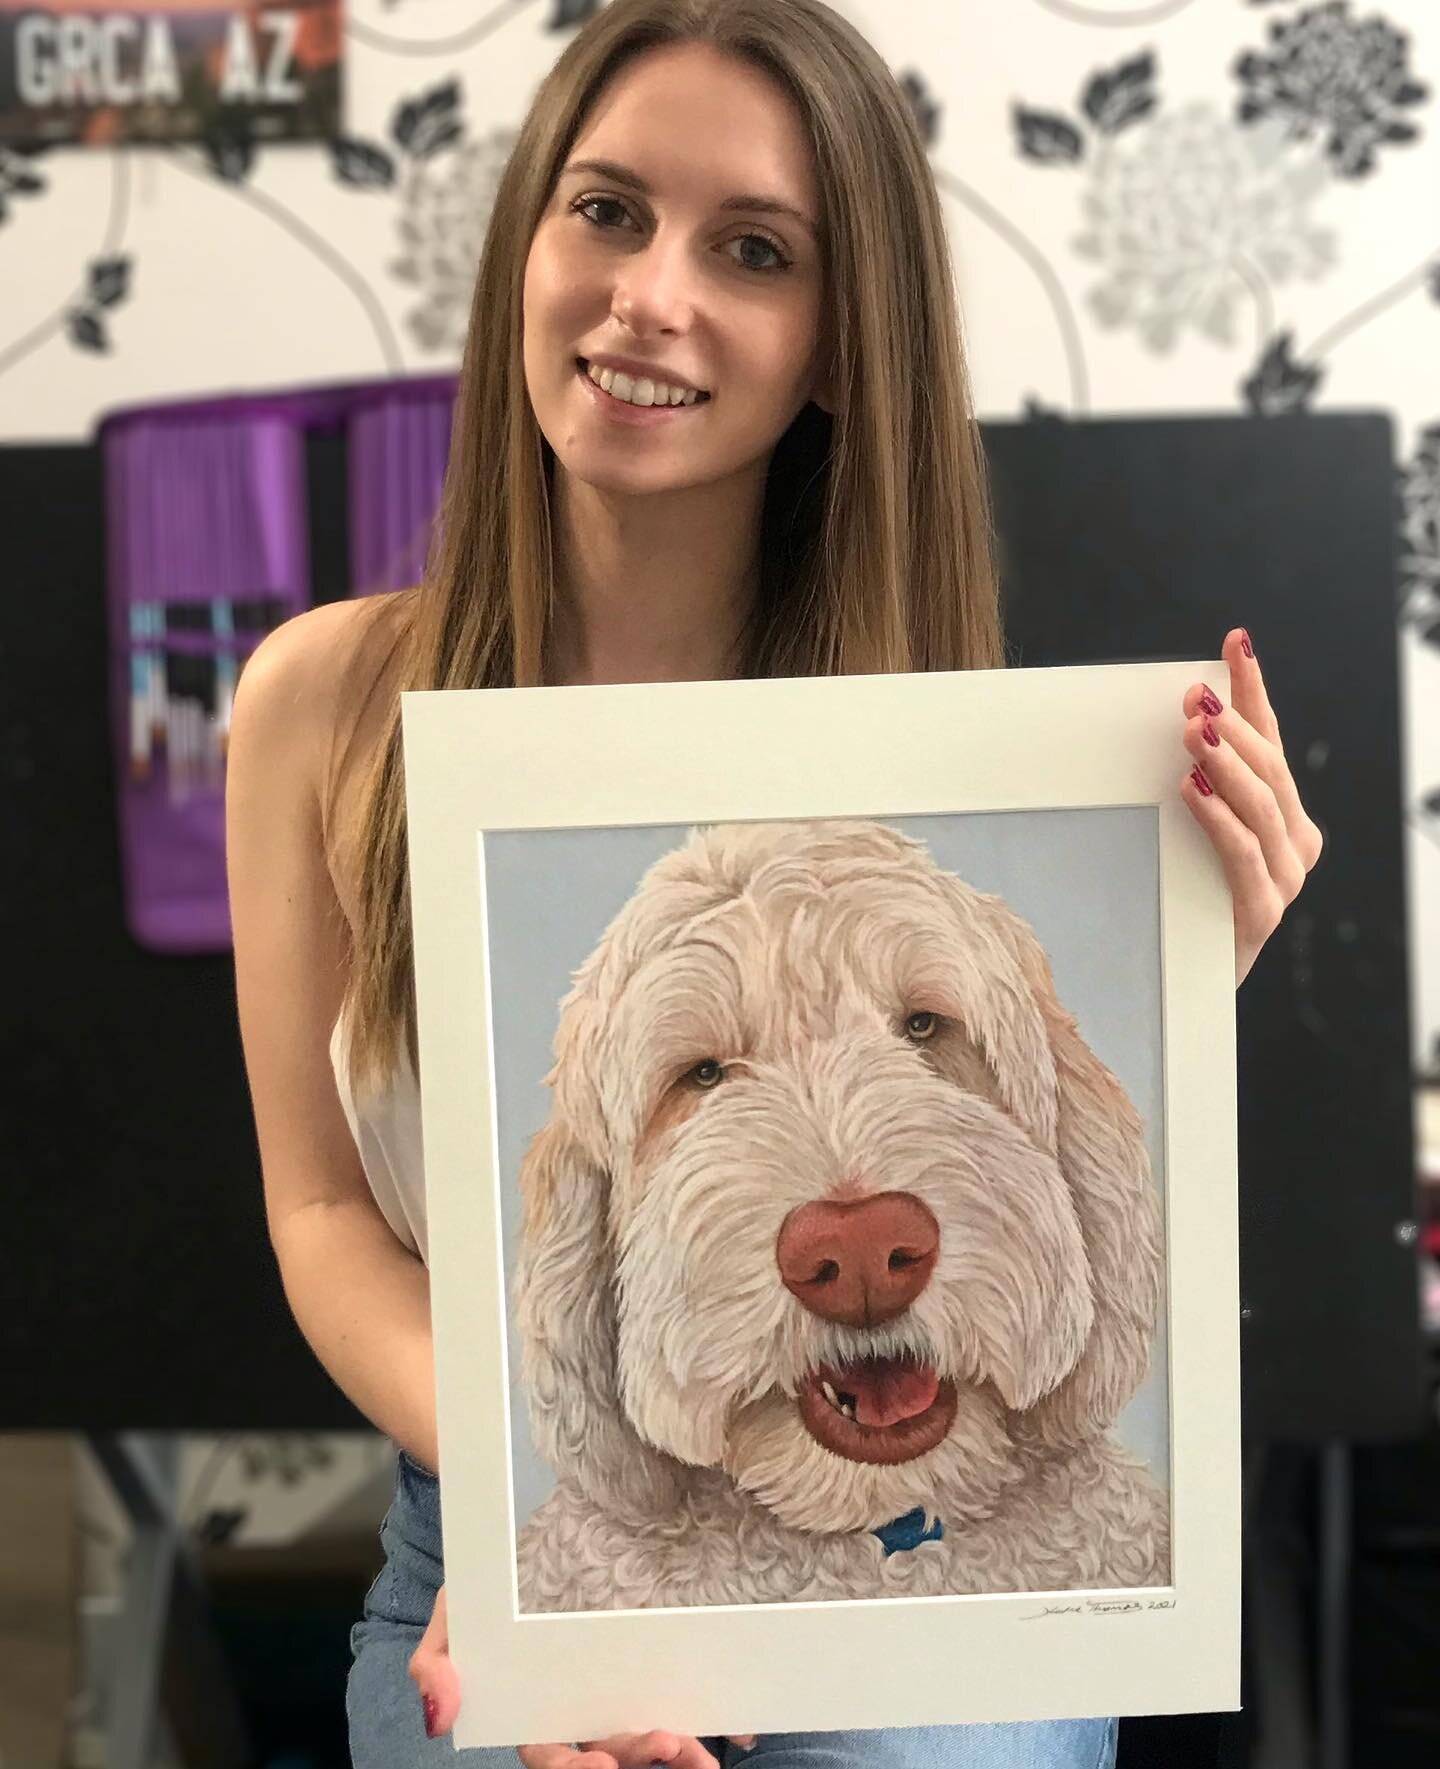 Hope we are all having a lovely weekend ☺️

Here is &lsquo;Albus&rsquo; and me 🐶. He was a larger size painting which I really enjoy as you can fit in a lot more of those finer details! 🎨 
 
The piece I am currently working on is a little different